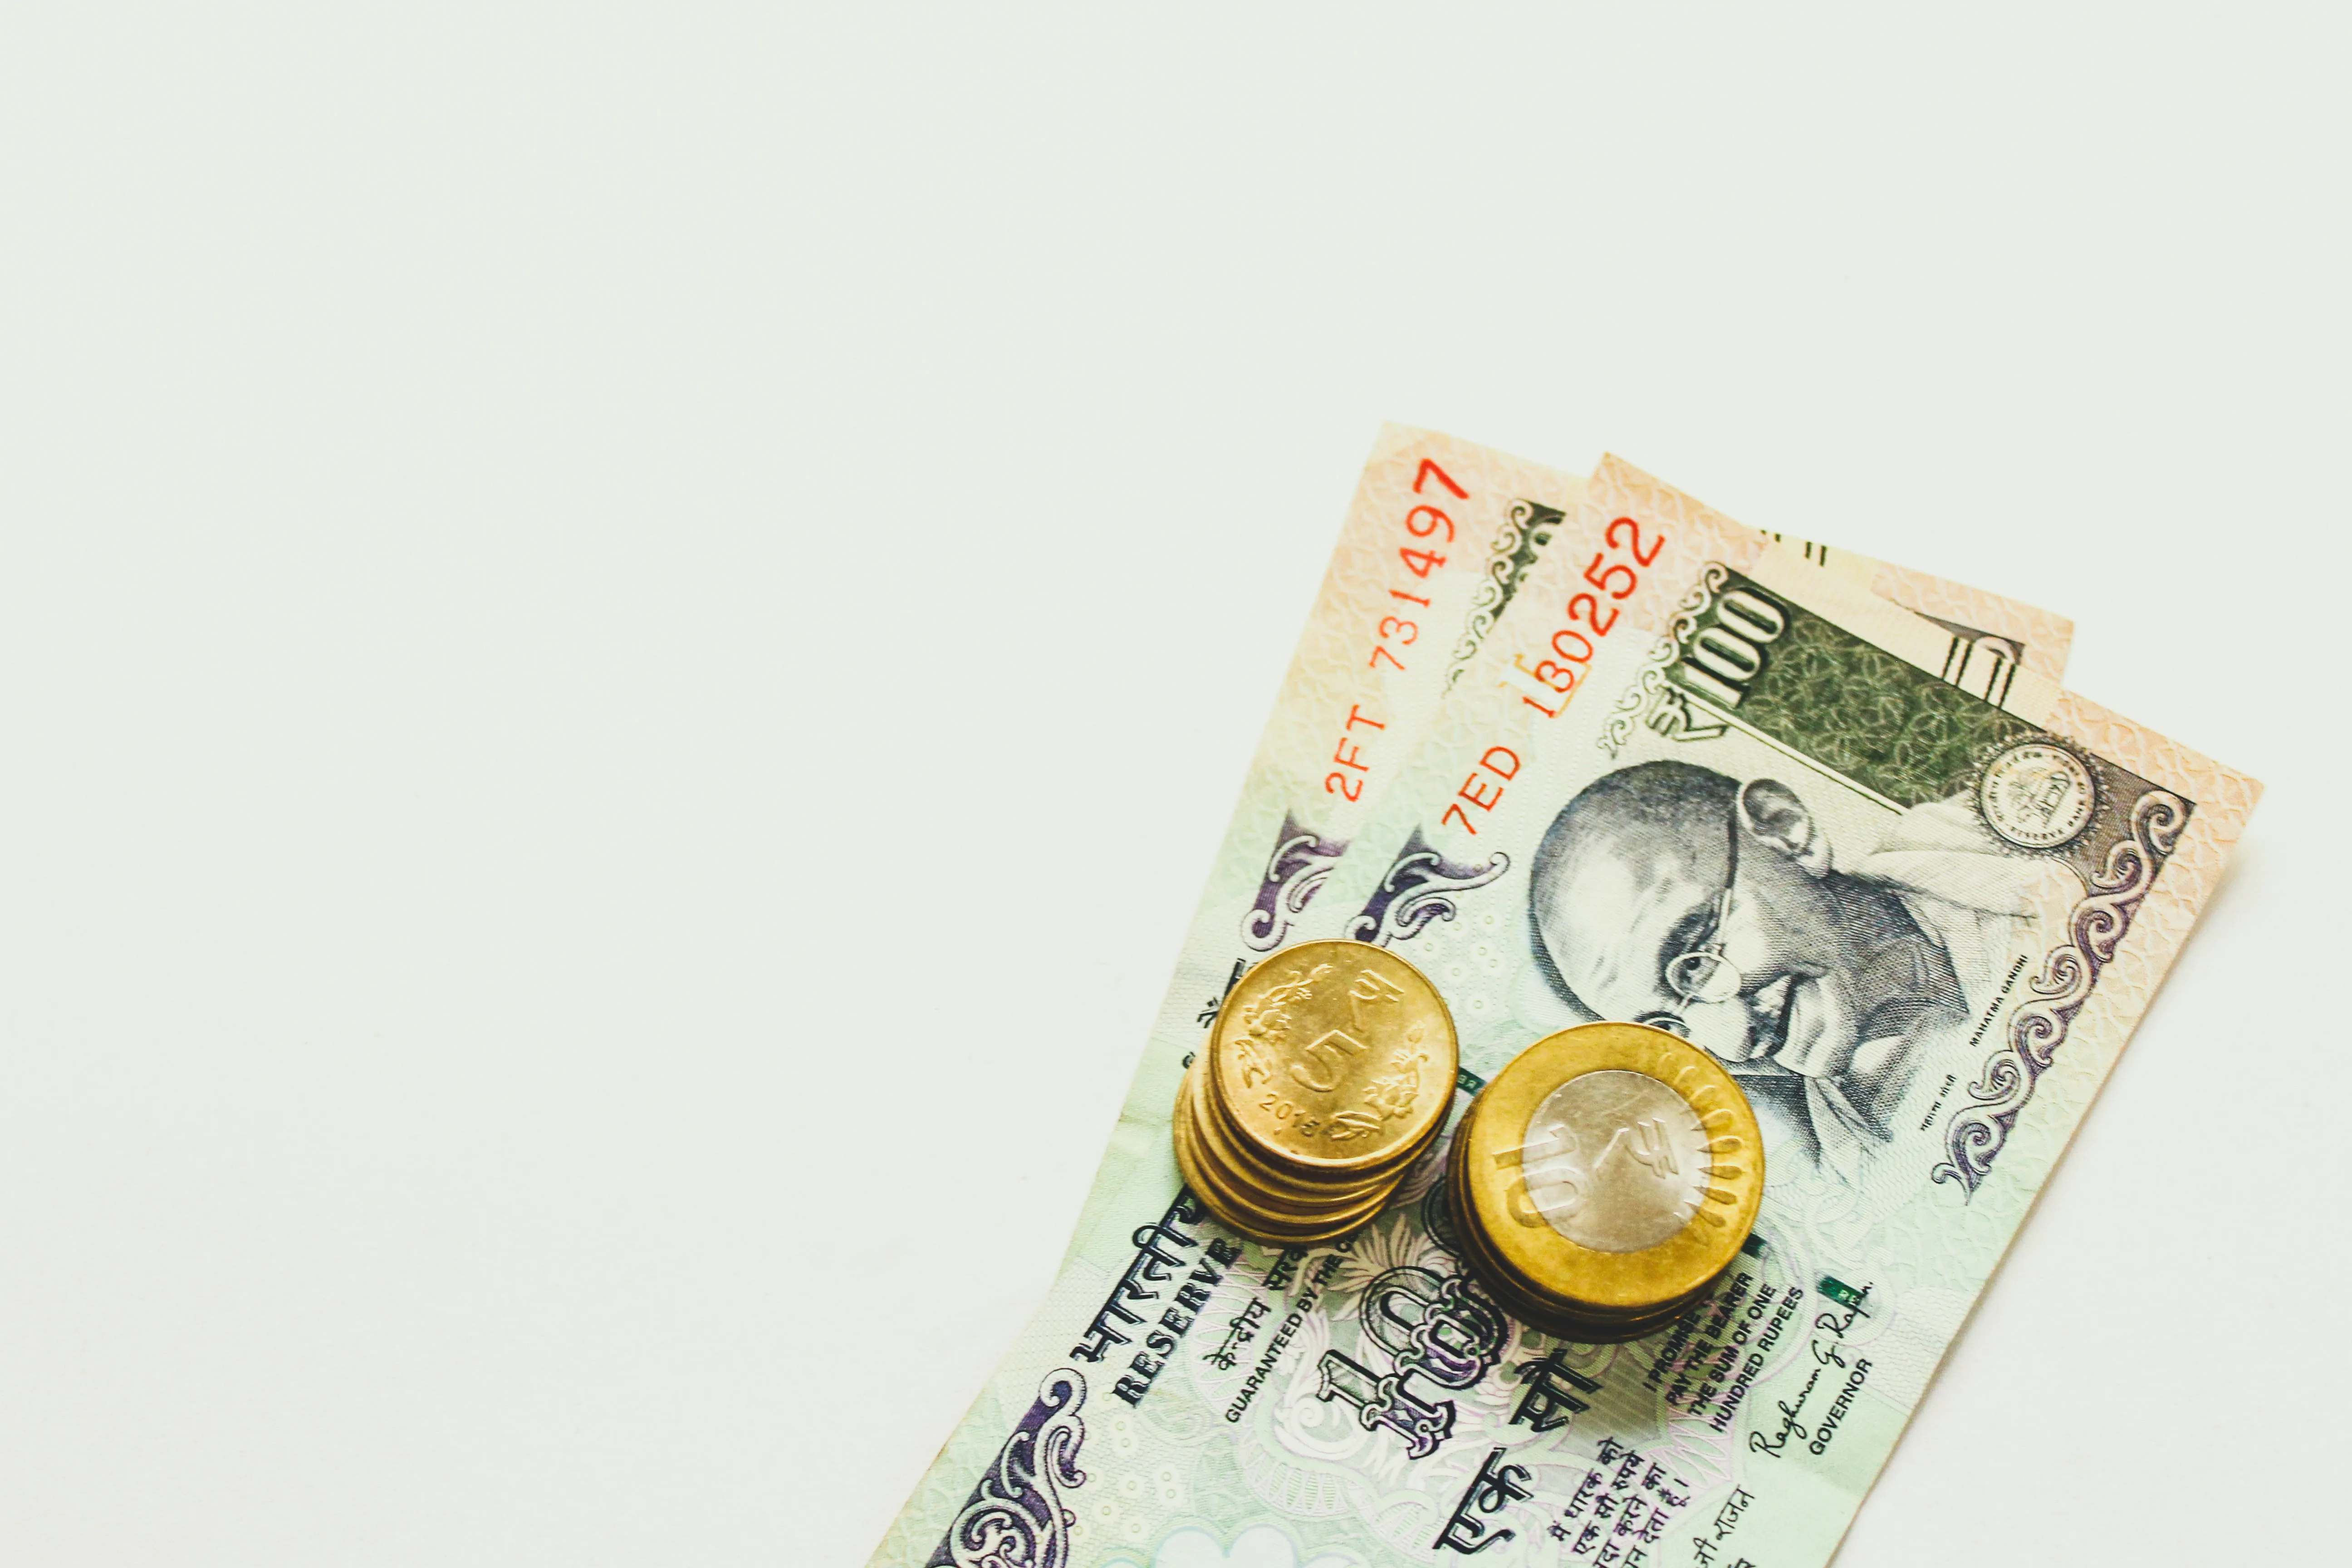 Oyo Seeks Fresh Funding of INR 1,000 Crore Amid Valuation Drop and Strategic Shifts